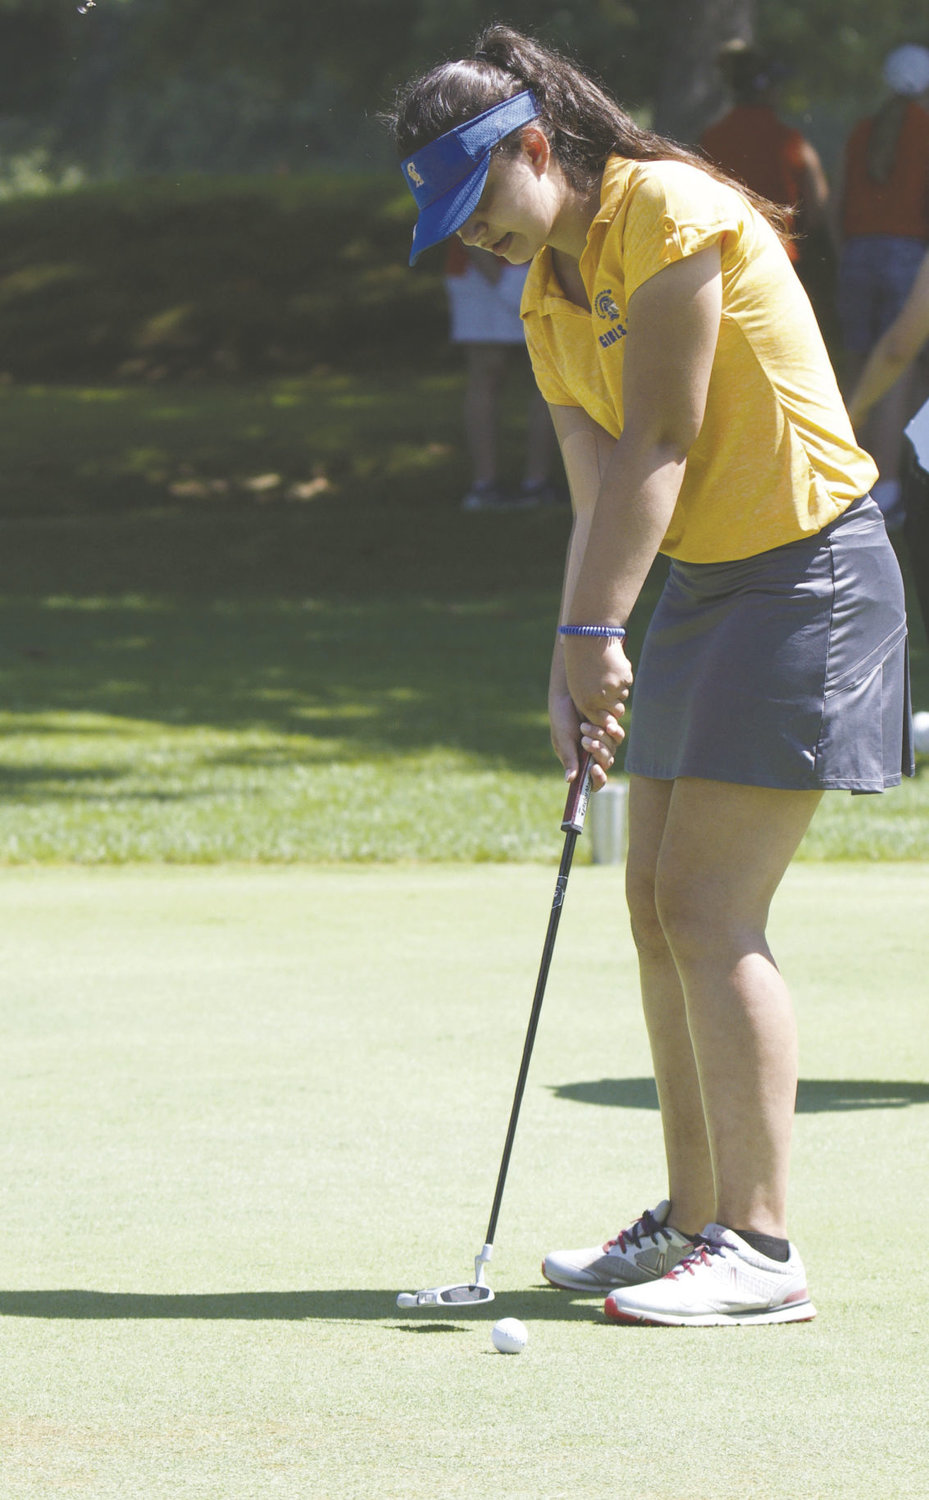 Bailey Mittal fired a 100 for Crawfordsville at the Southmont Invite on Saturday at the Crawfordsville Country Club.